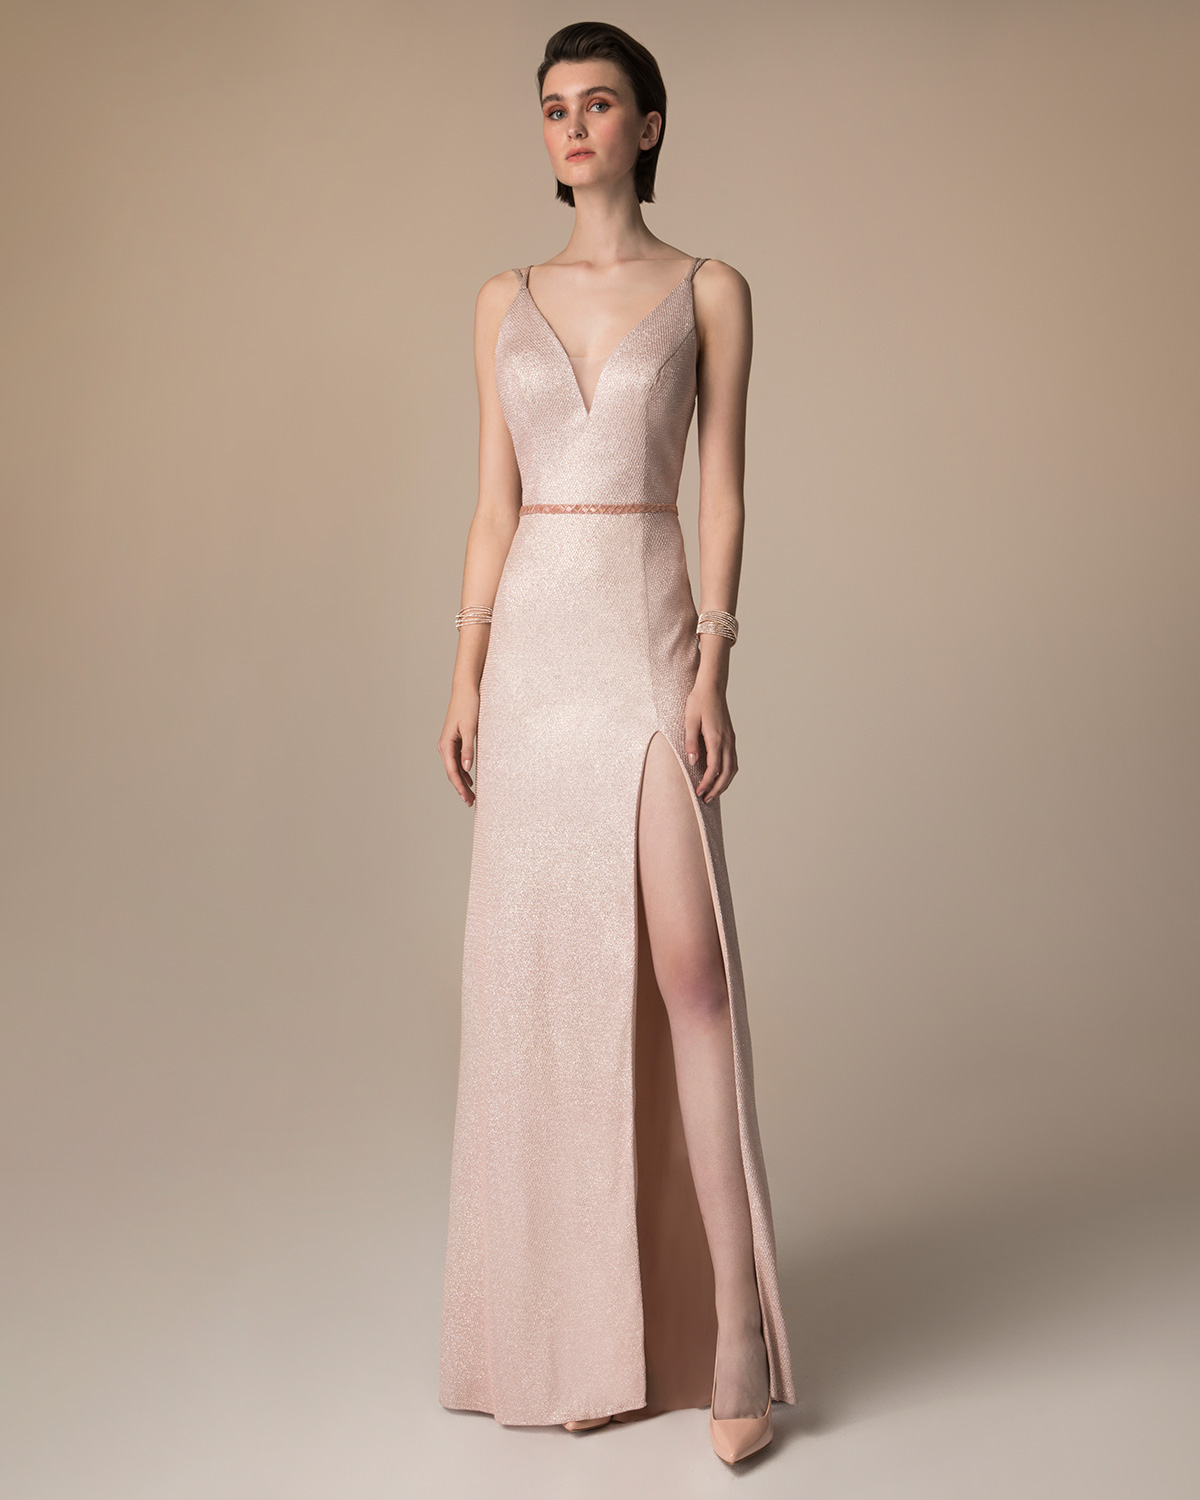 Evening Dresses / Long evening dress with beaded belt and shining fabric